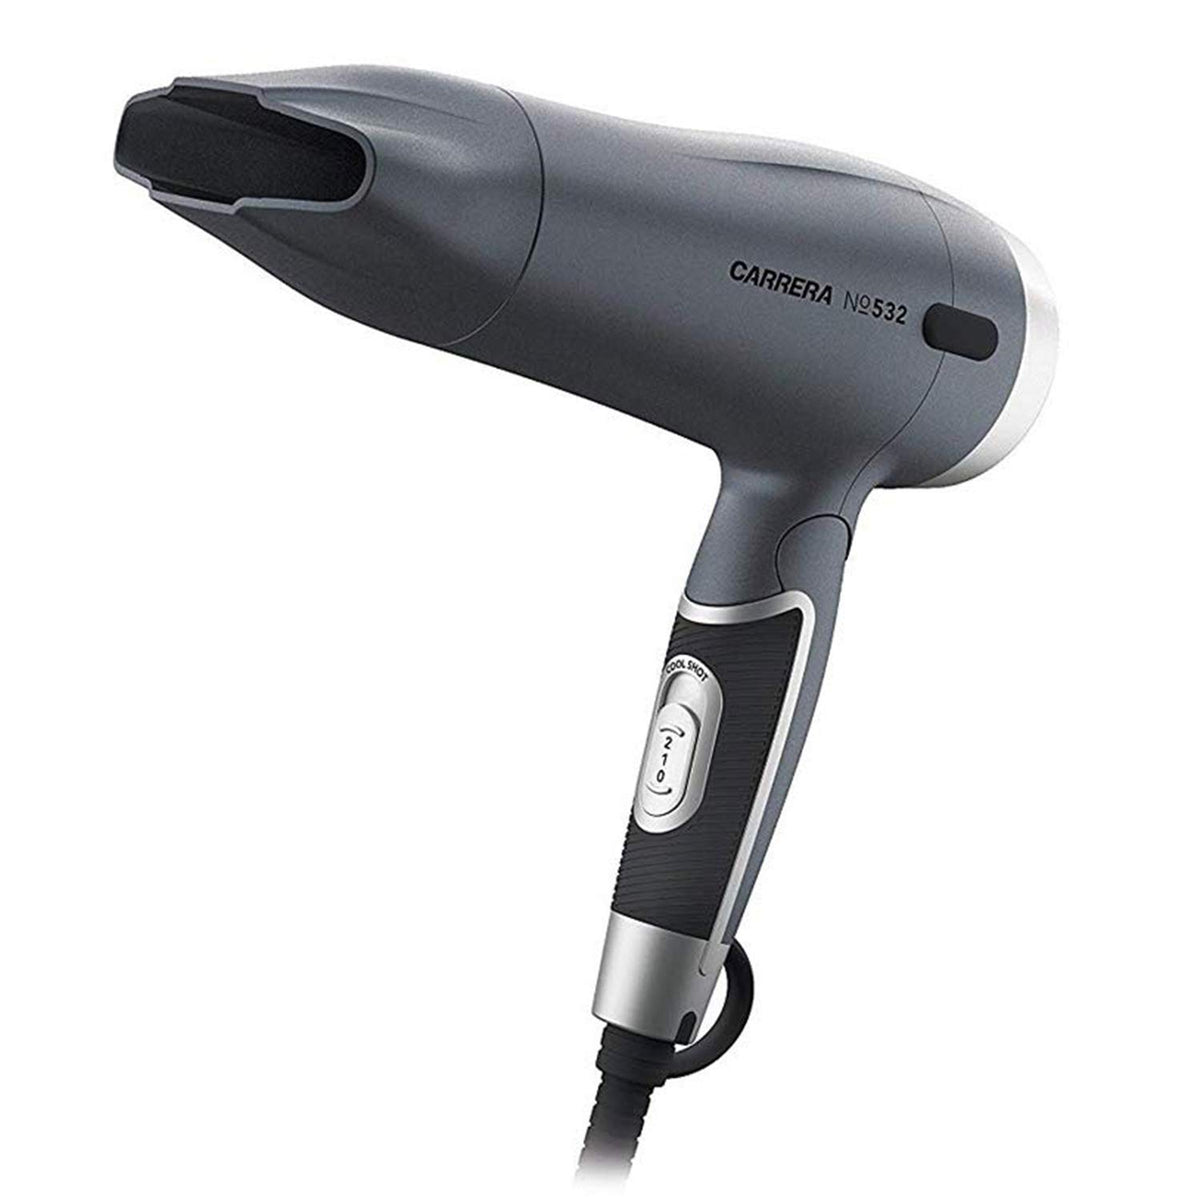 Carrera, Professional Hair Dryers for Men & Women, Hairdryers Styling Nozzle Diffuser, Blow Dry, Hot-Cold Air, NO532